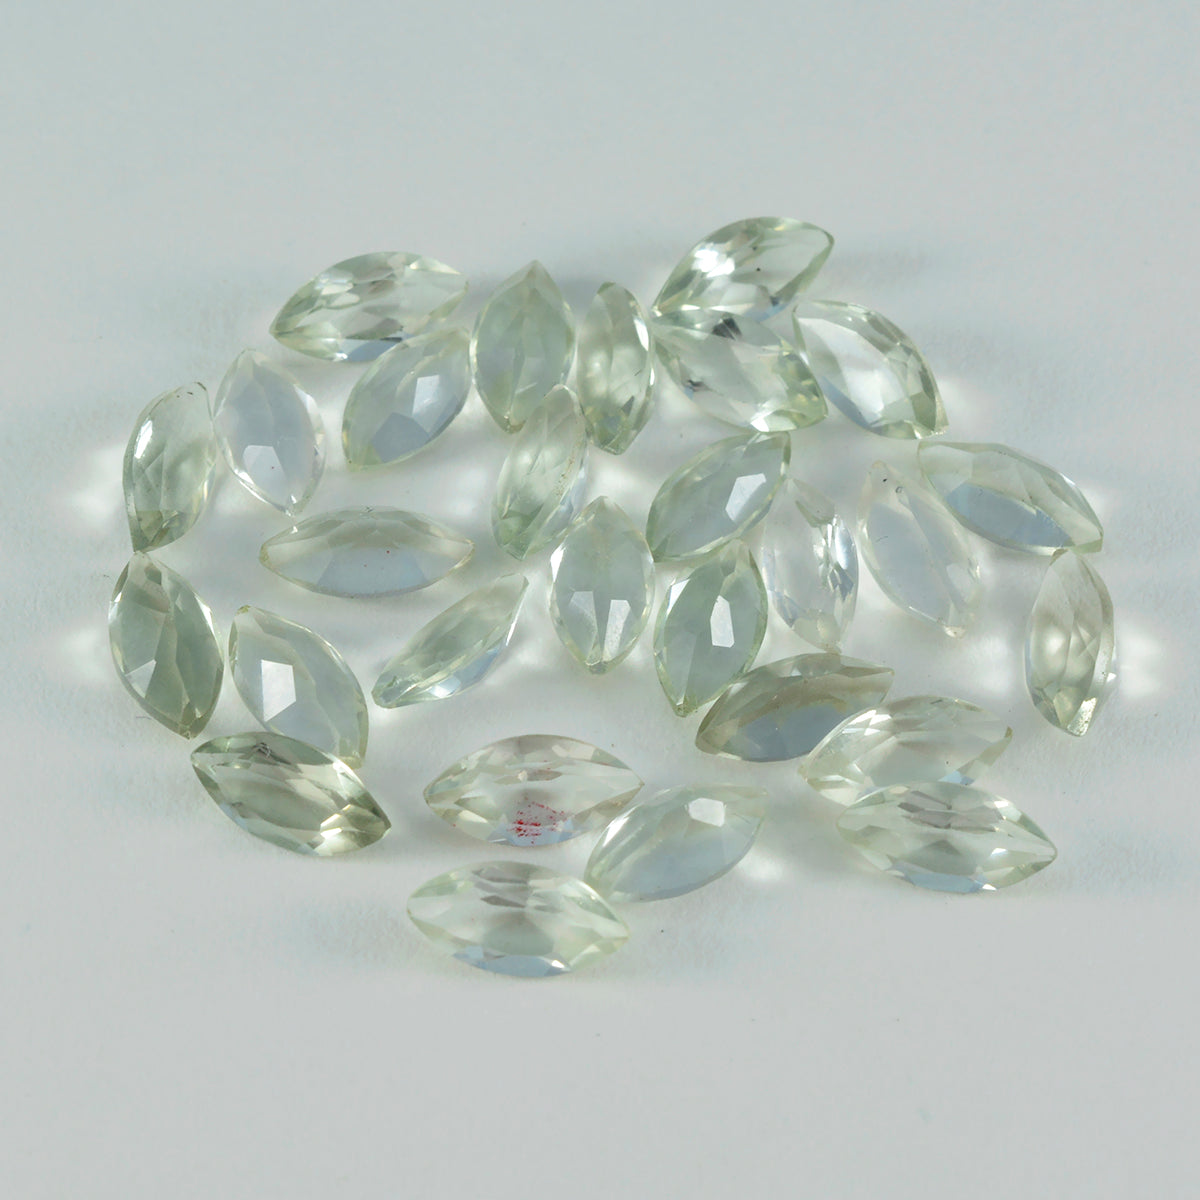 Riyogems 1PC Green Amethyst Faceted 2x4 mm Marquise Shape handsome Quality Loose Gemstone